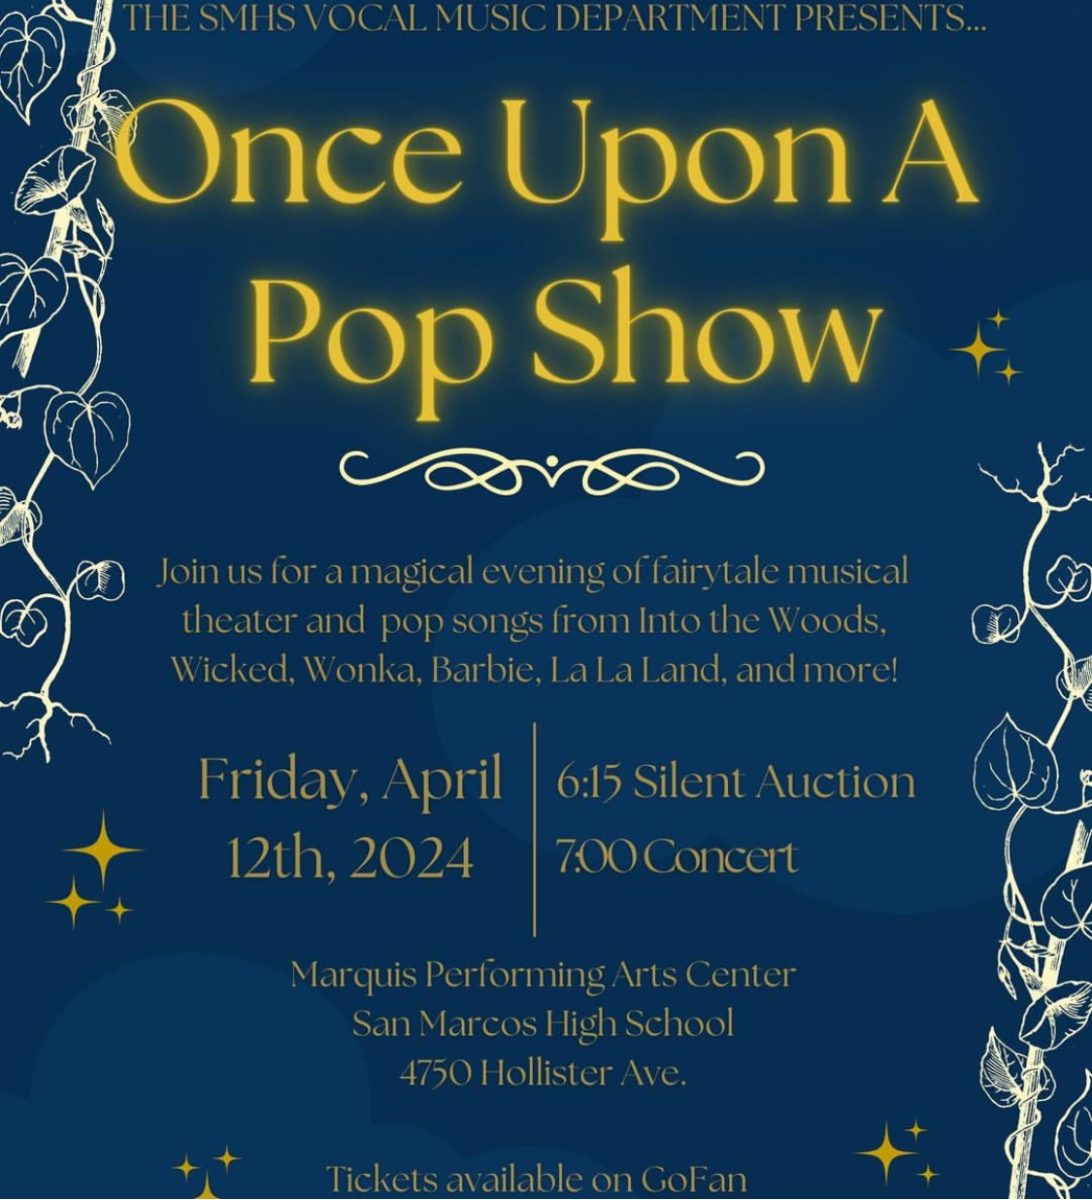 Once Upon A Pop Show